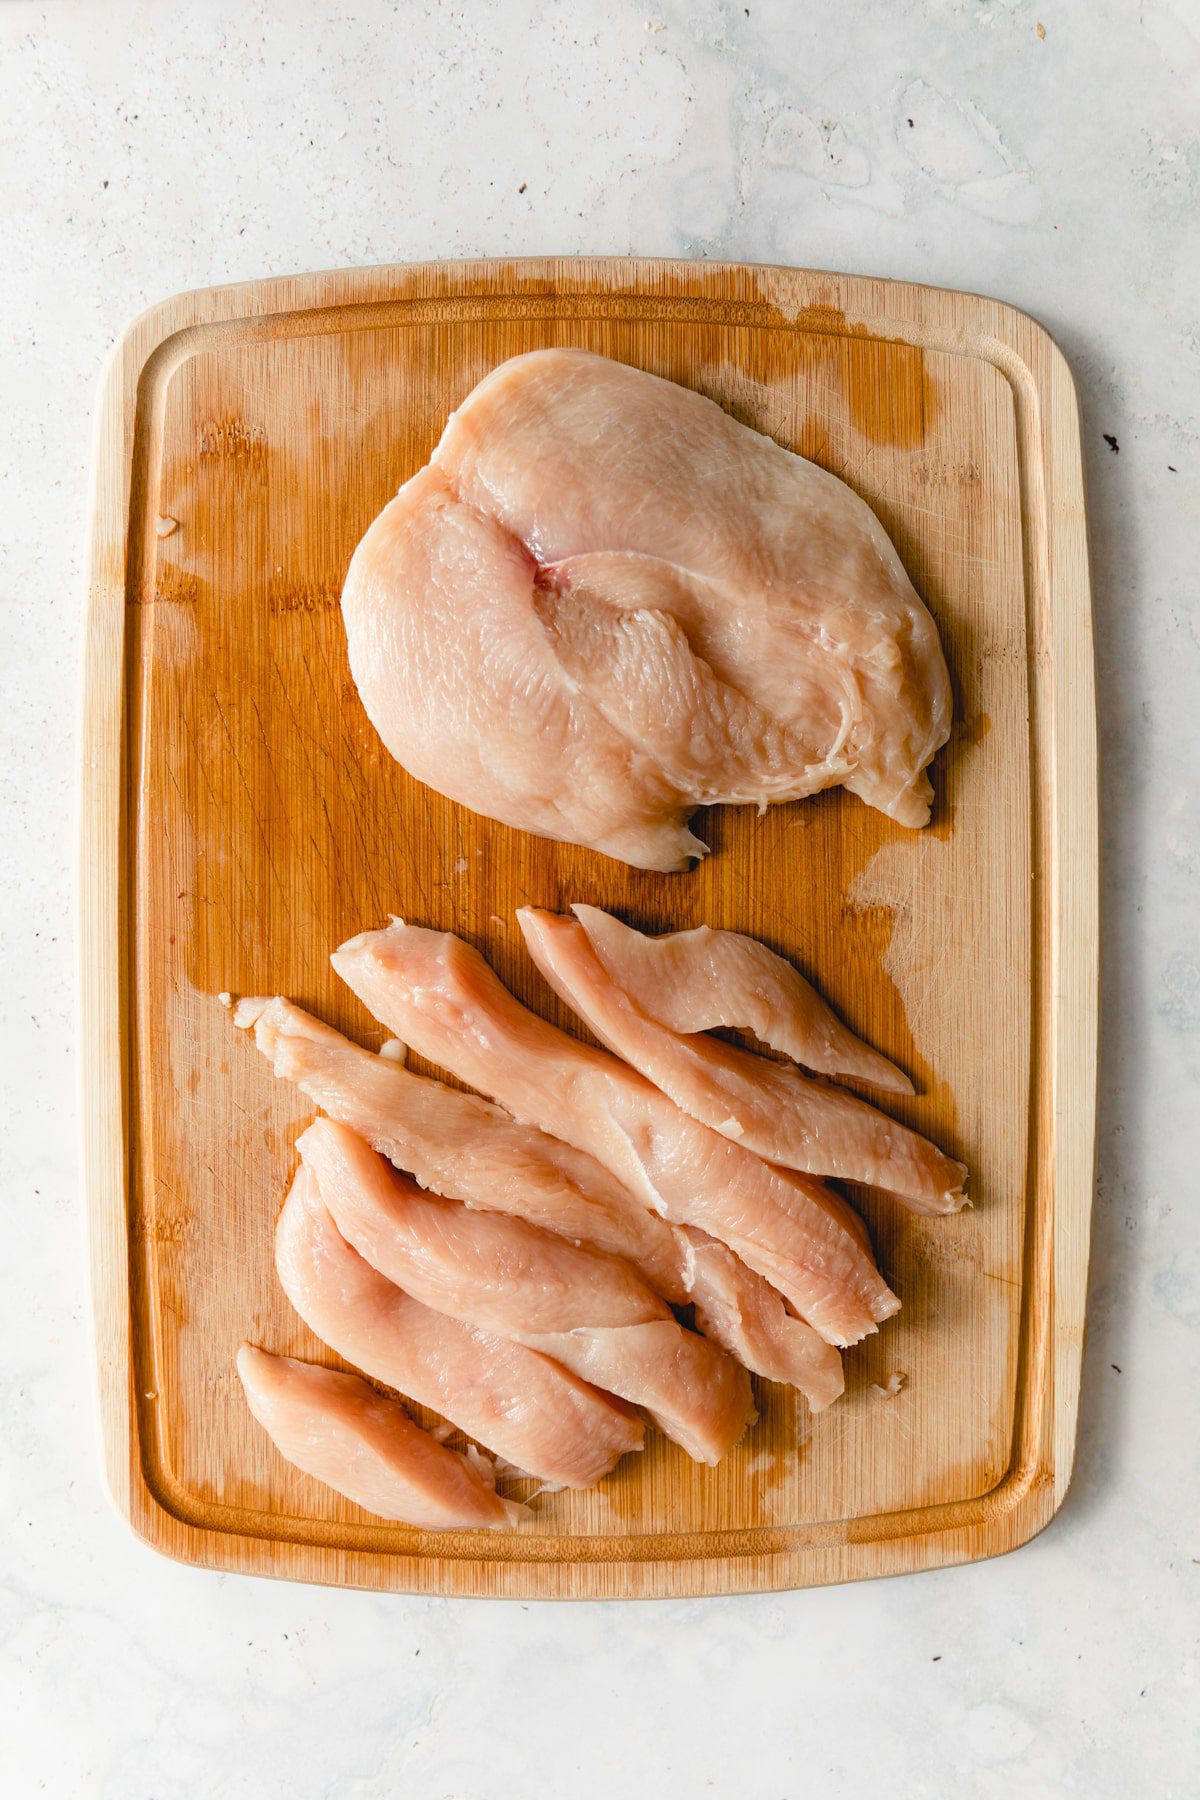 one butterfly sliced chicken breast and one sliced chicken breast on a cutting board